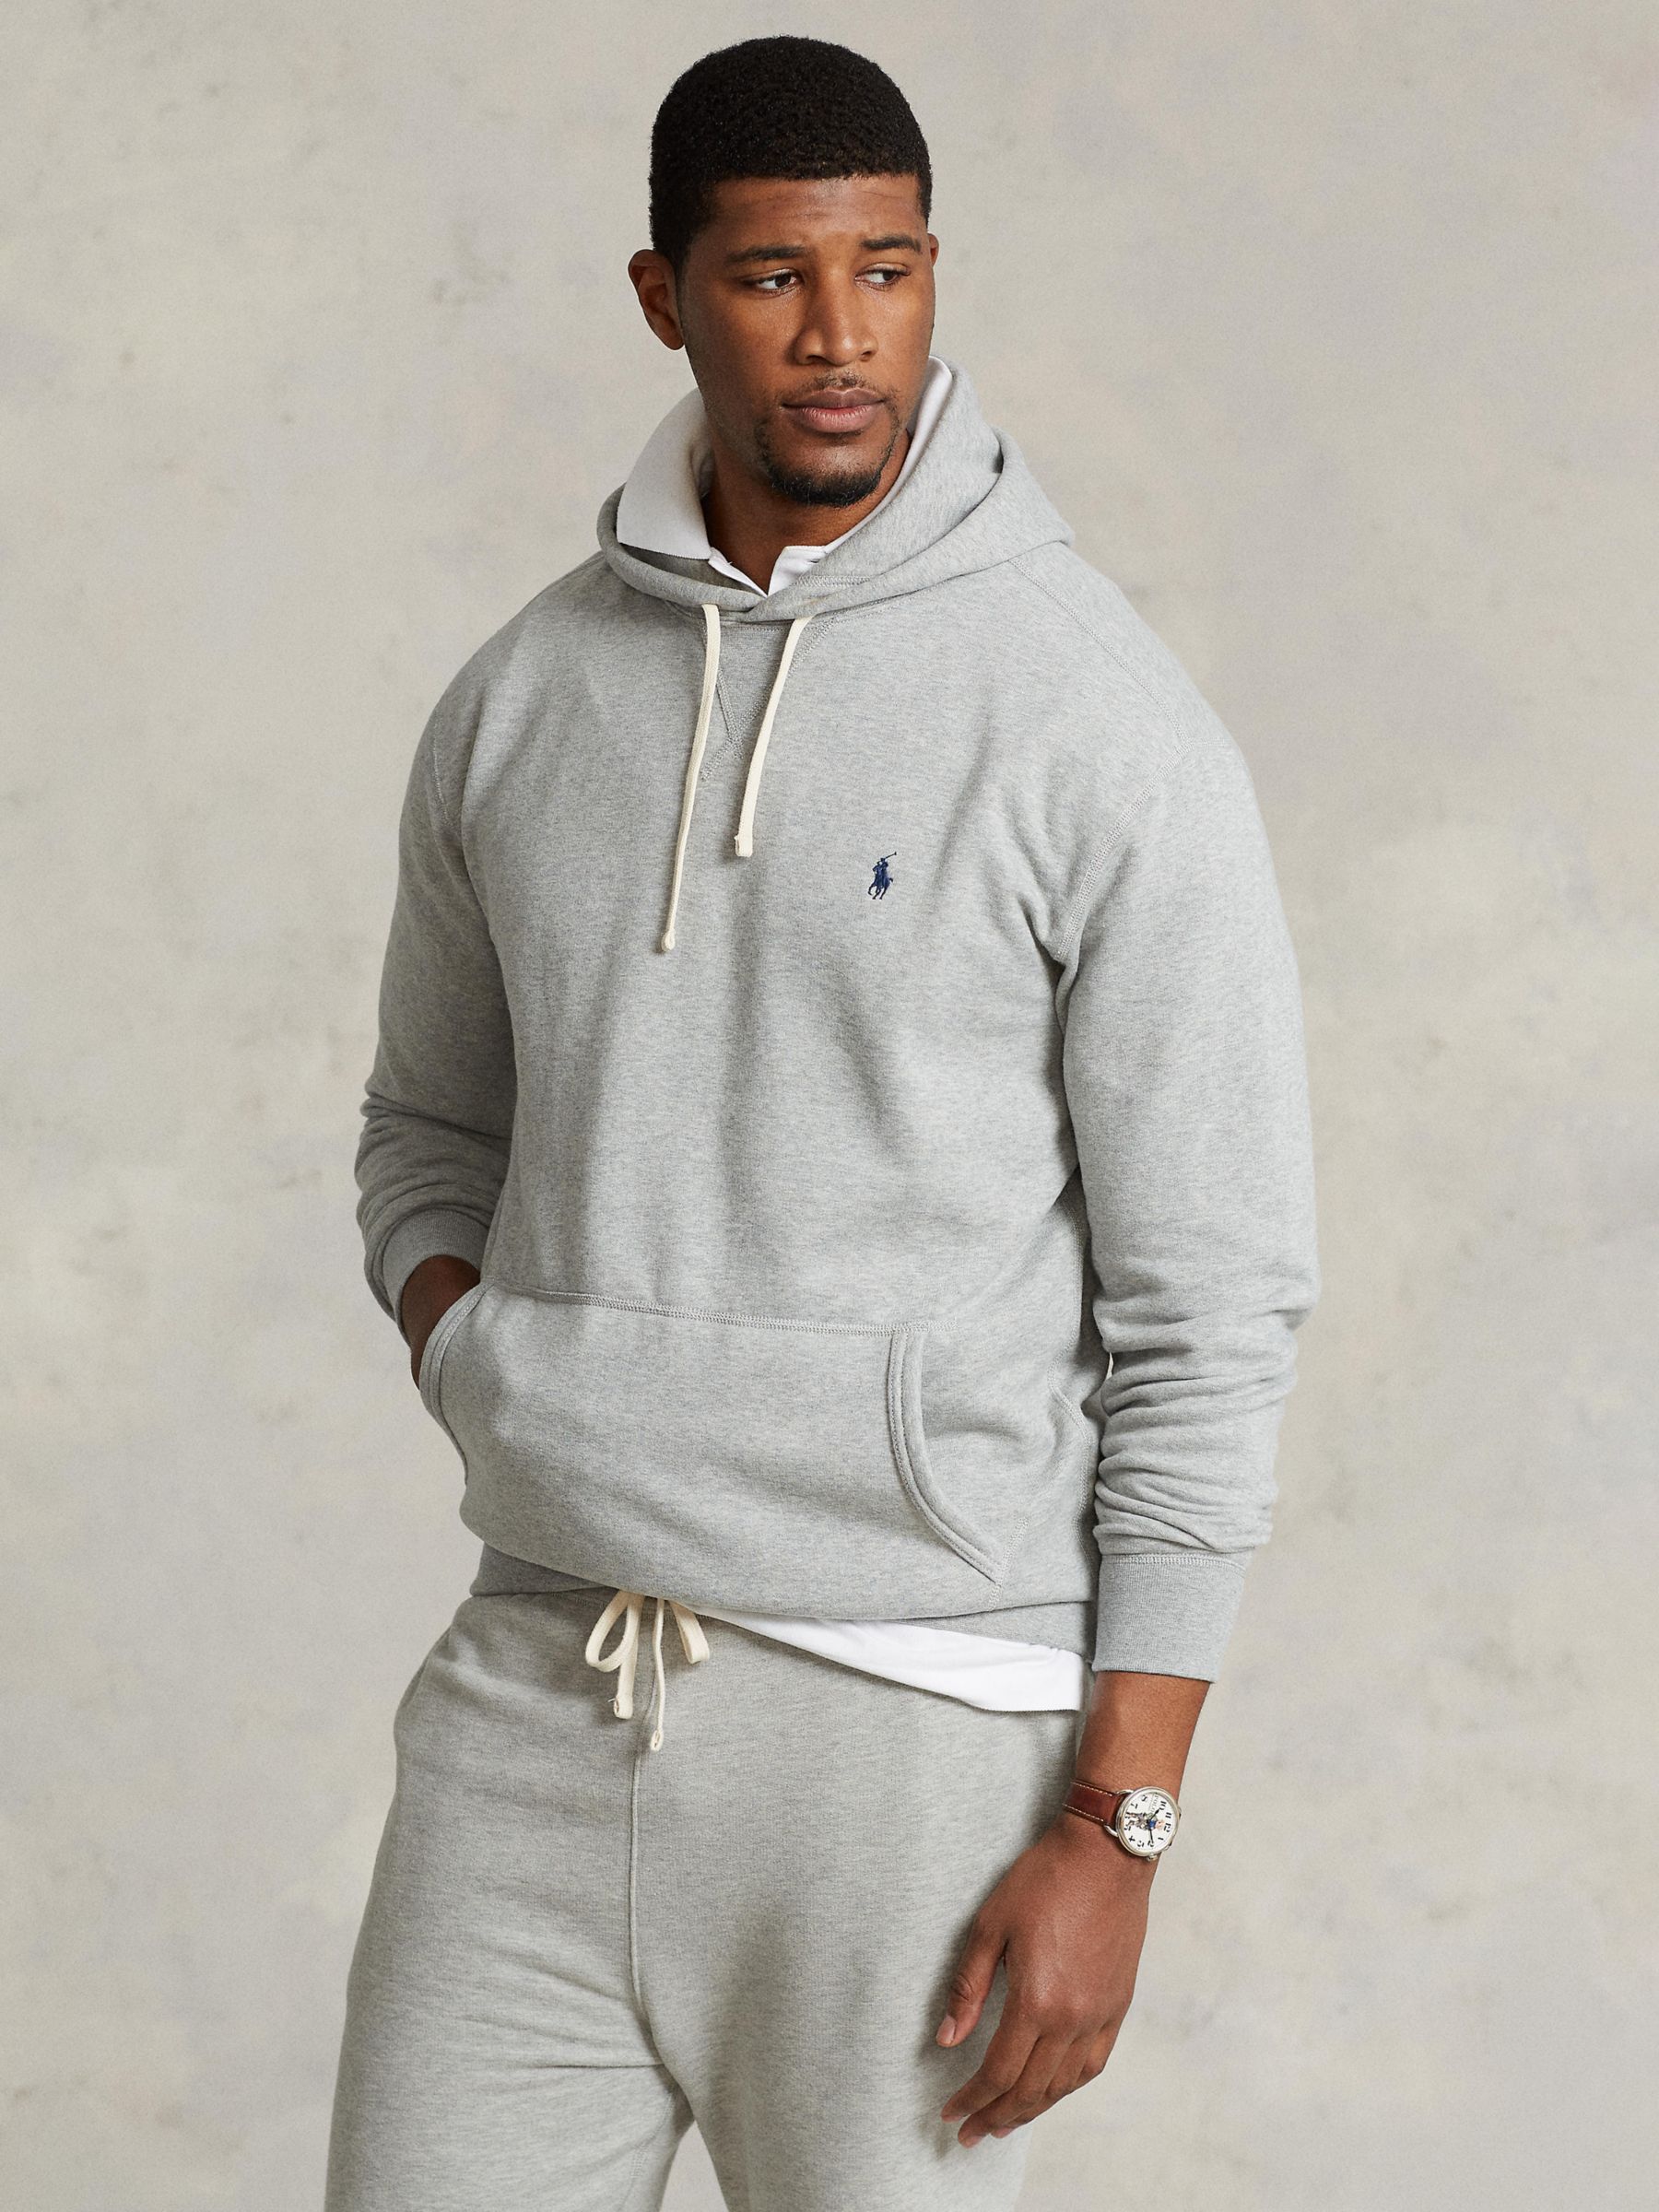 Polo Ralph Lauren Big and Tall Hoodies and Sweatshirts in Big and